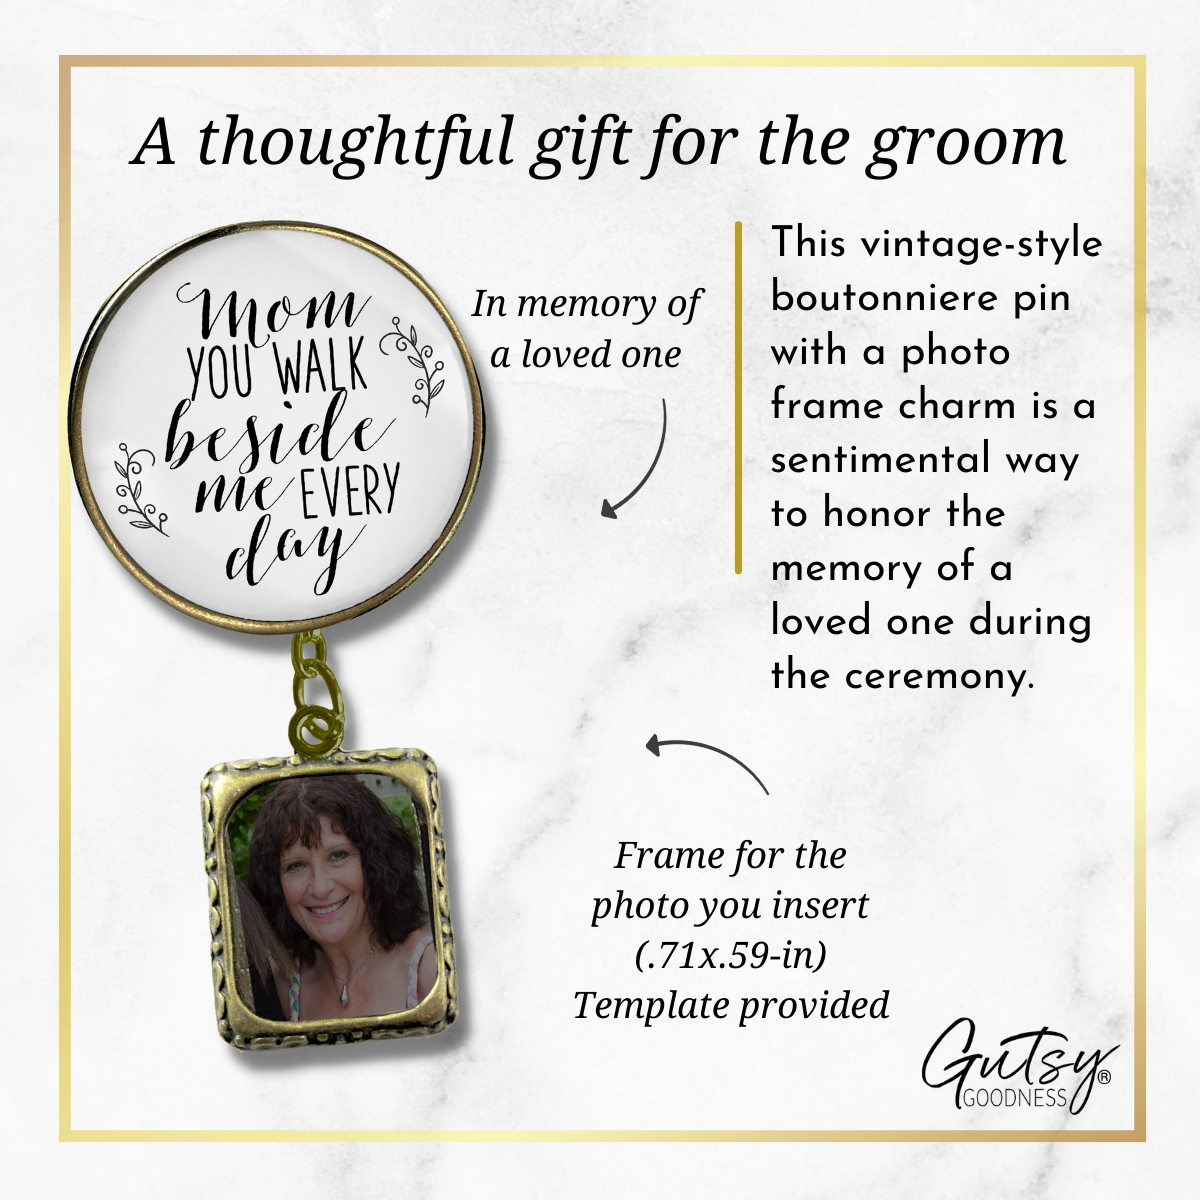 Wedding Memorial Boutonniere Pin Photo Frame Honor Mom Vintage White - Gutsy Goodness